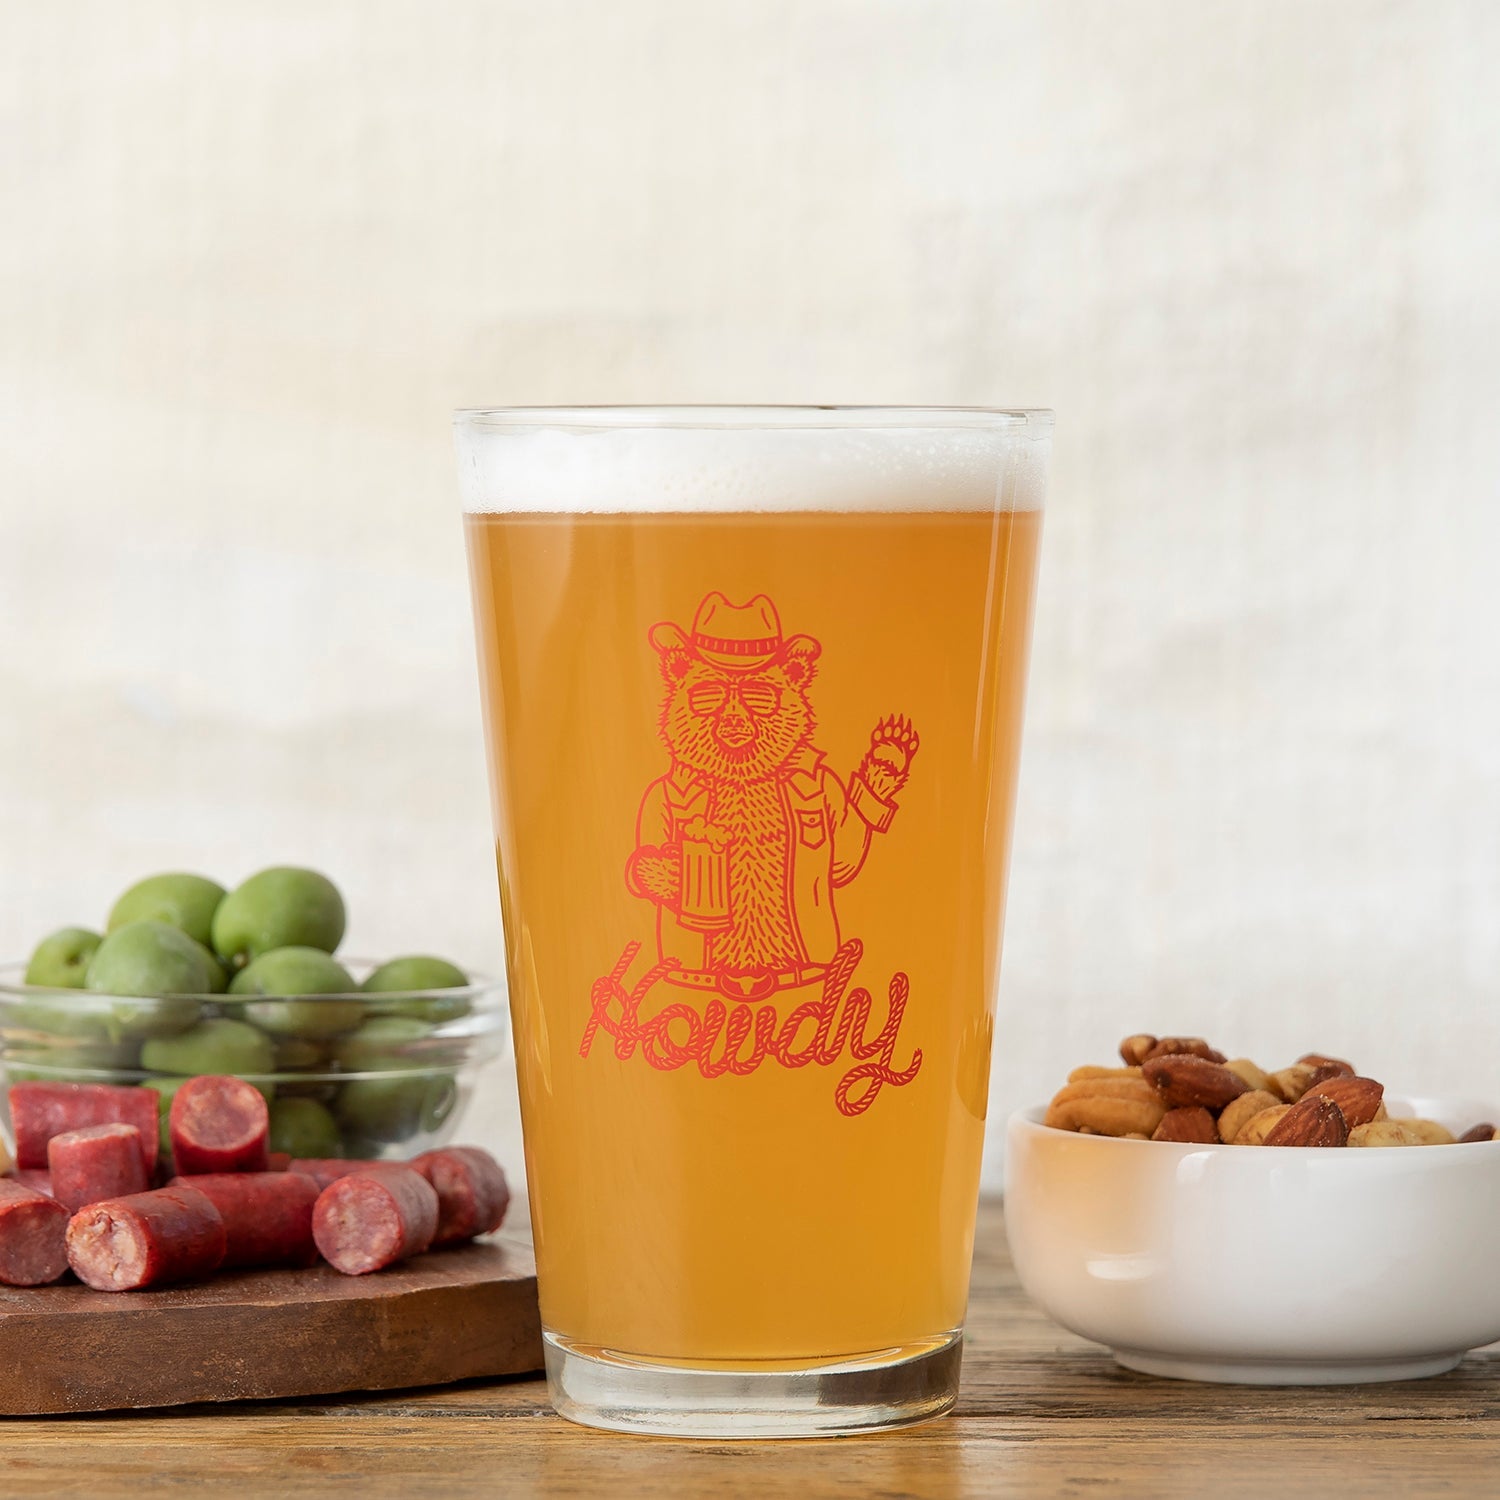 Pint Glass Sets | Mix and Match any 4 Beer Glasses - Pint Glass - Two Little Fruits - Two Little Fruits